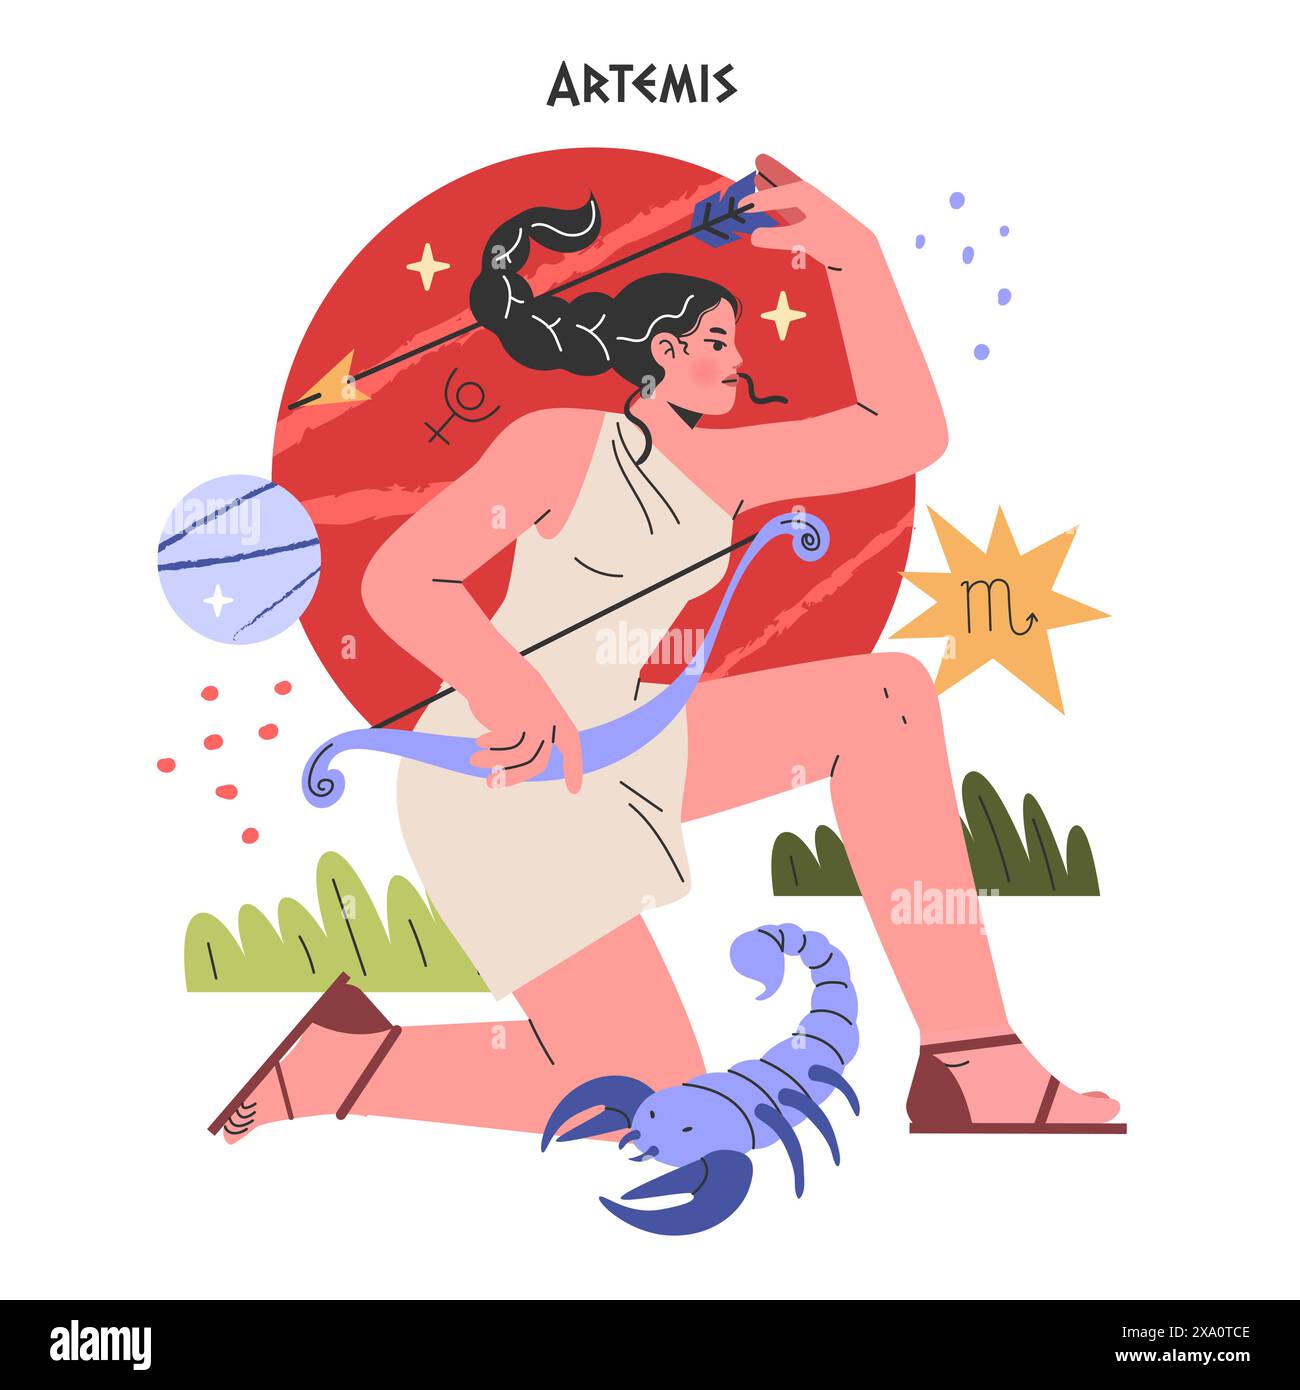 Ancient Greek Gods concept. Vector illustration of Artemis with a bow and celestial symbols, capturing the essence of mythology and astrology. Stock Vector